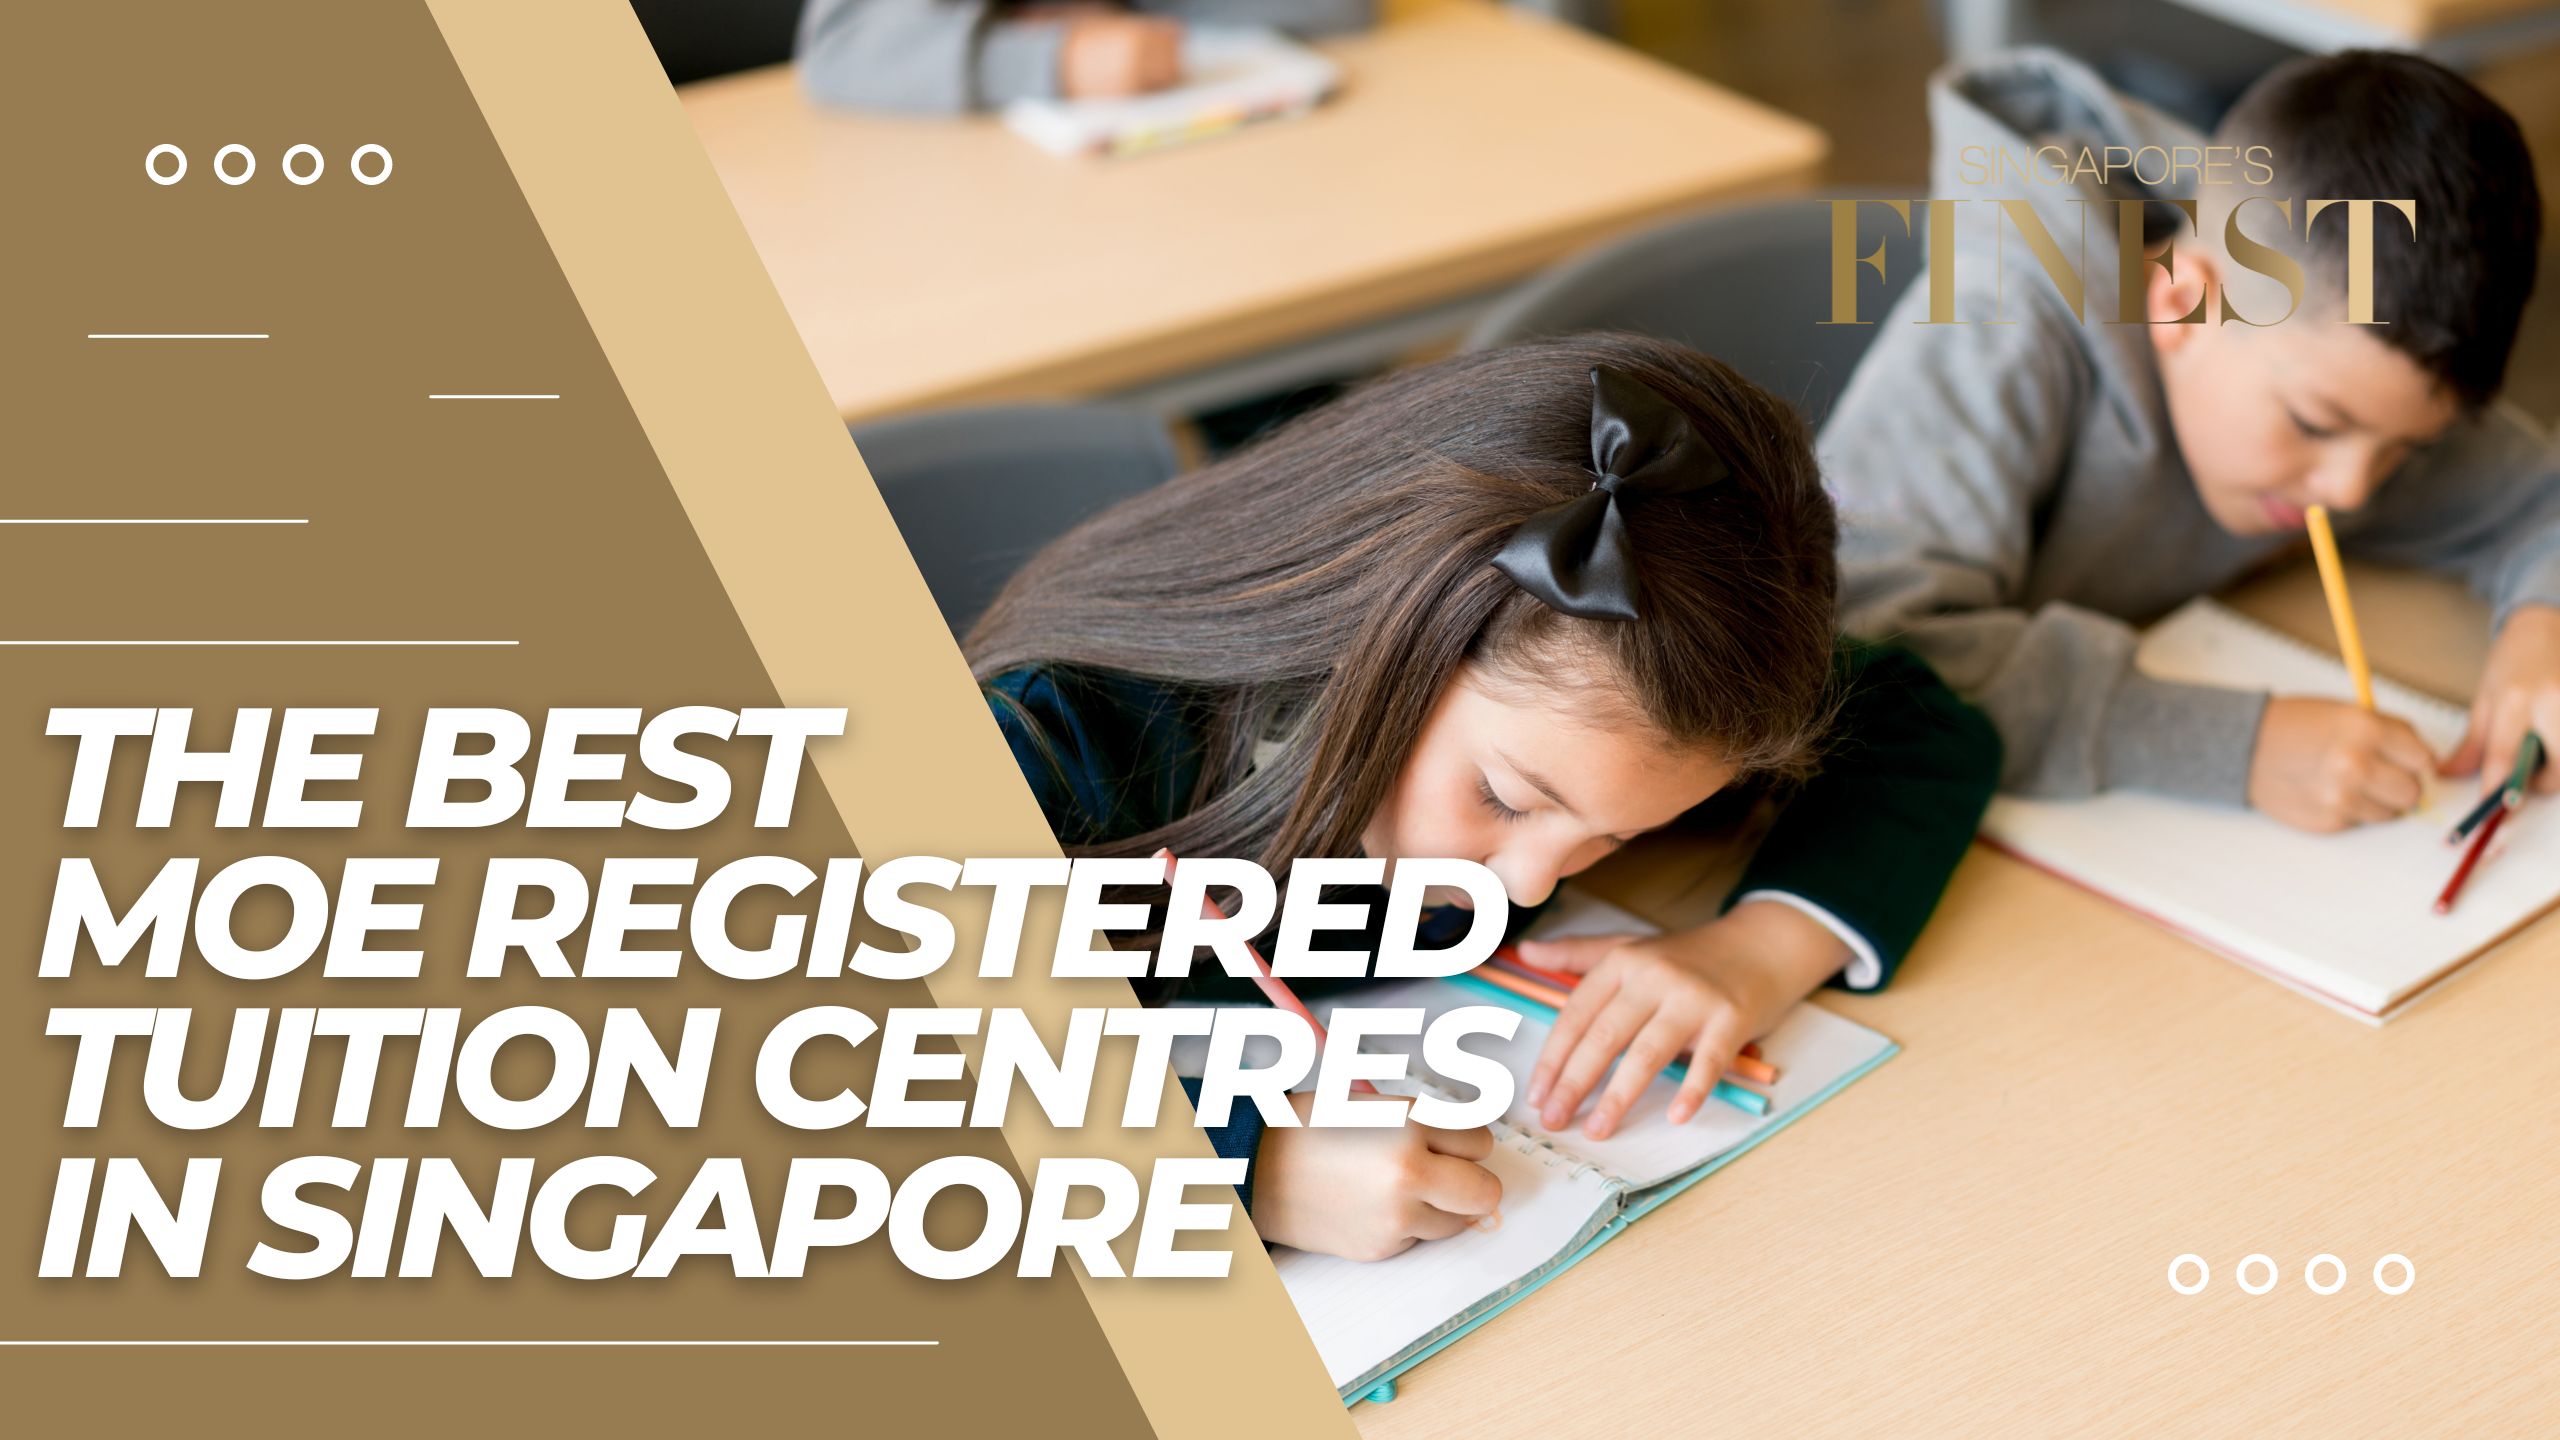 The Finest MOE Registered Tuition Centres in Singapore